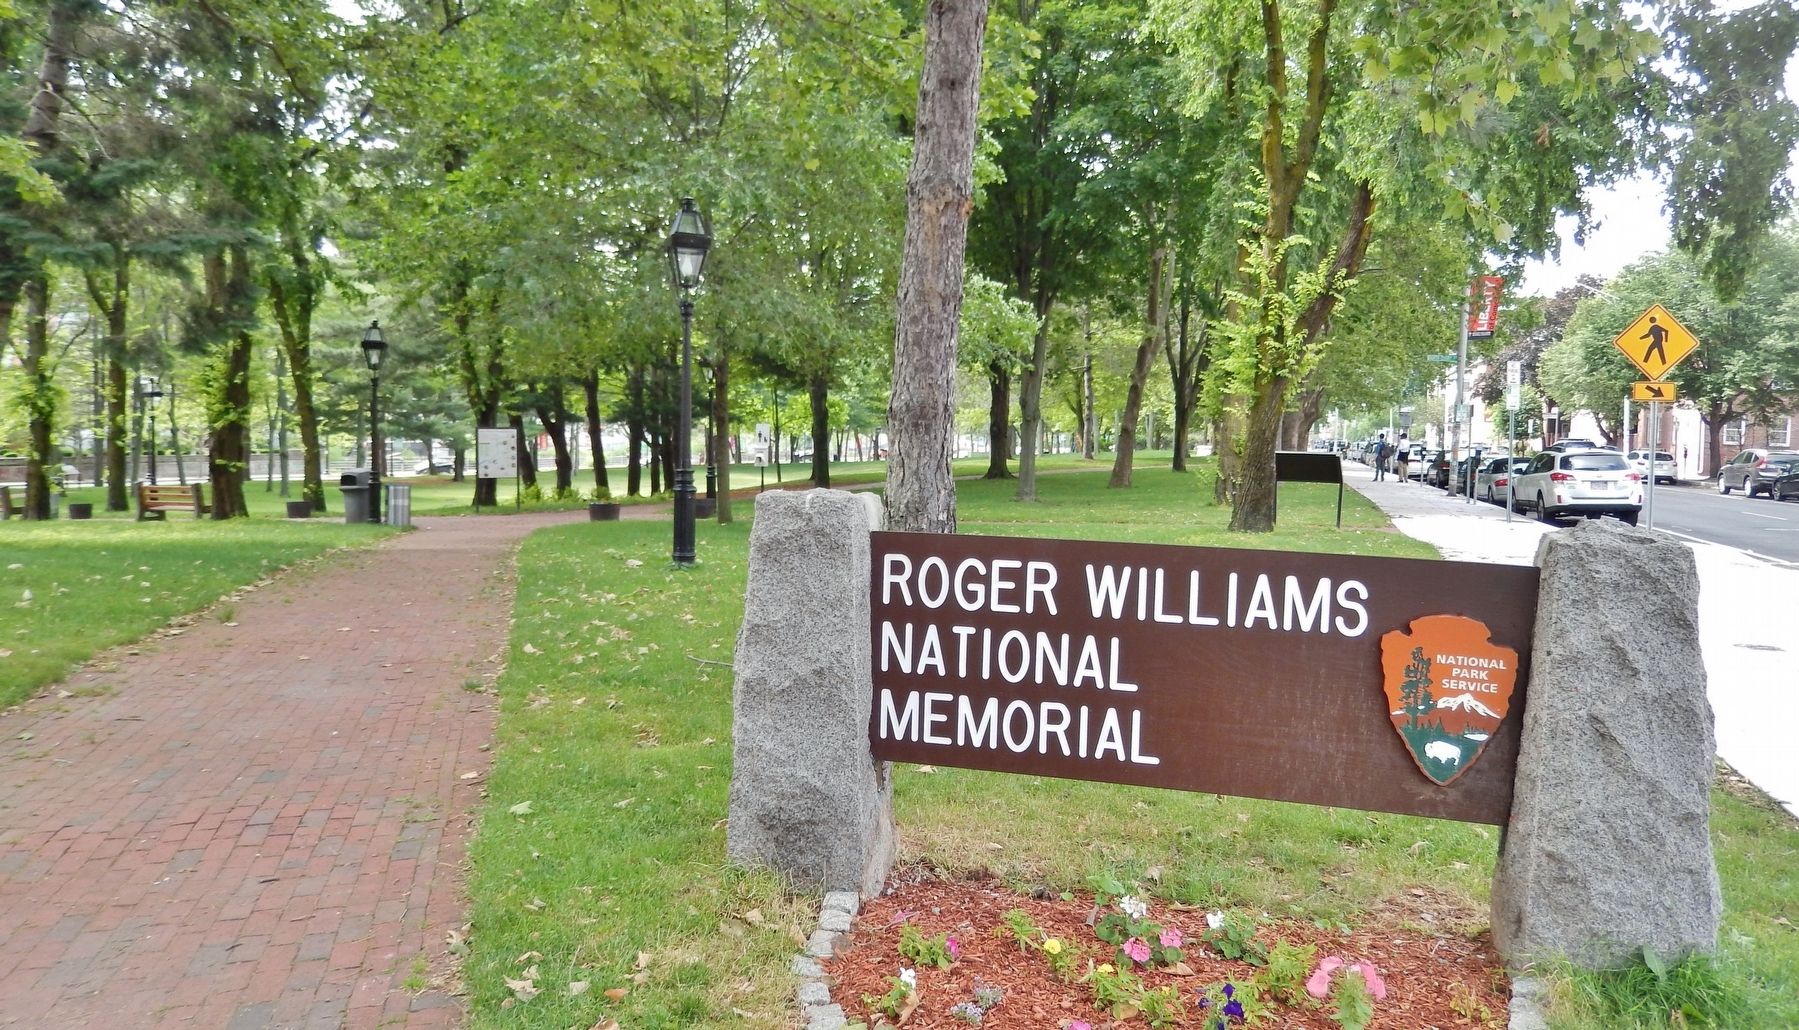 Roger Williams National Memorial Sign (<i>marker visible beside path in background</i>) image. Click for full size.